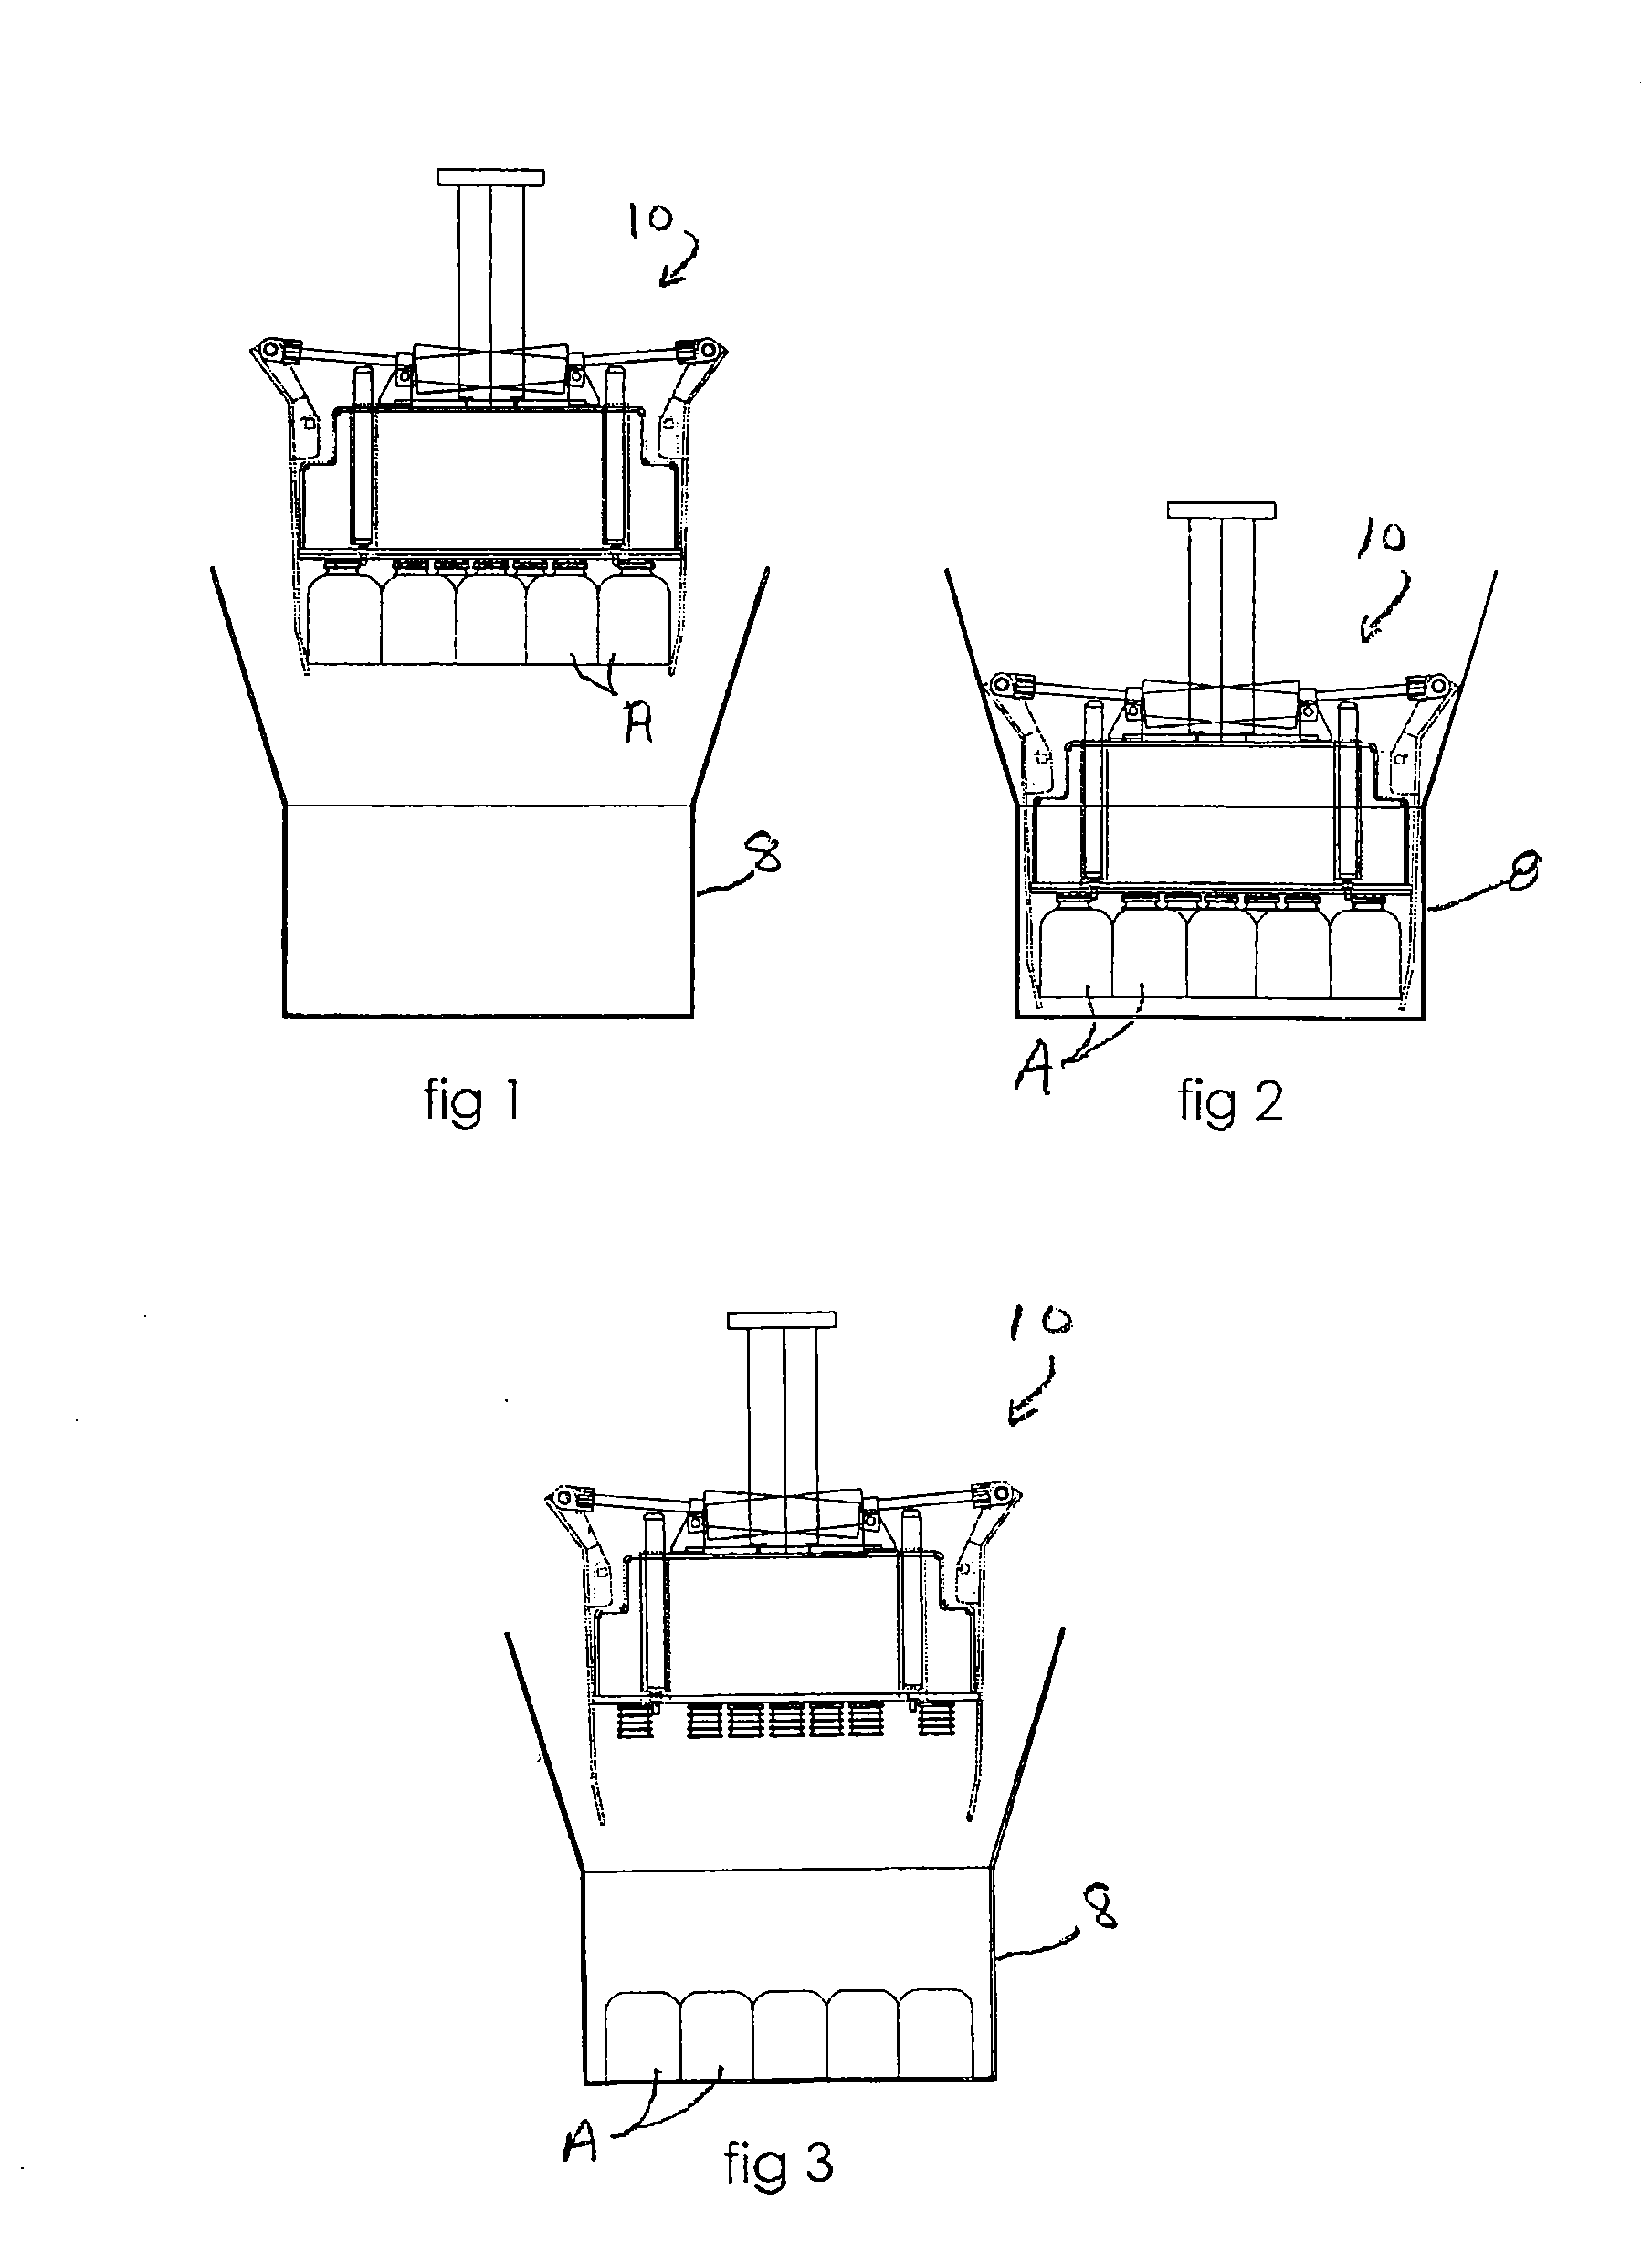 Method of Forming U-Shaped Insert and Inserting About Goods in Container